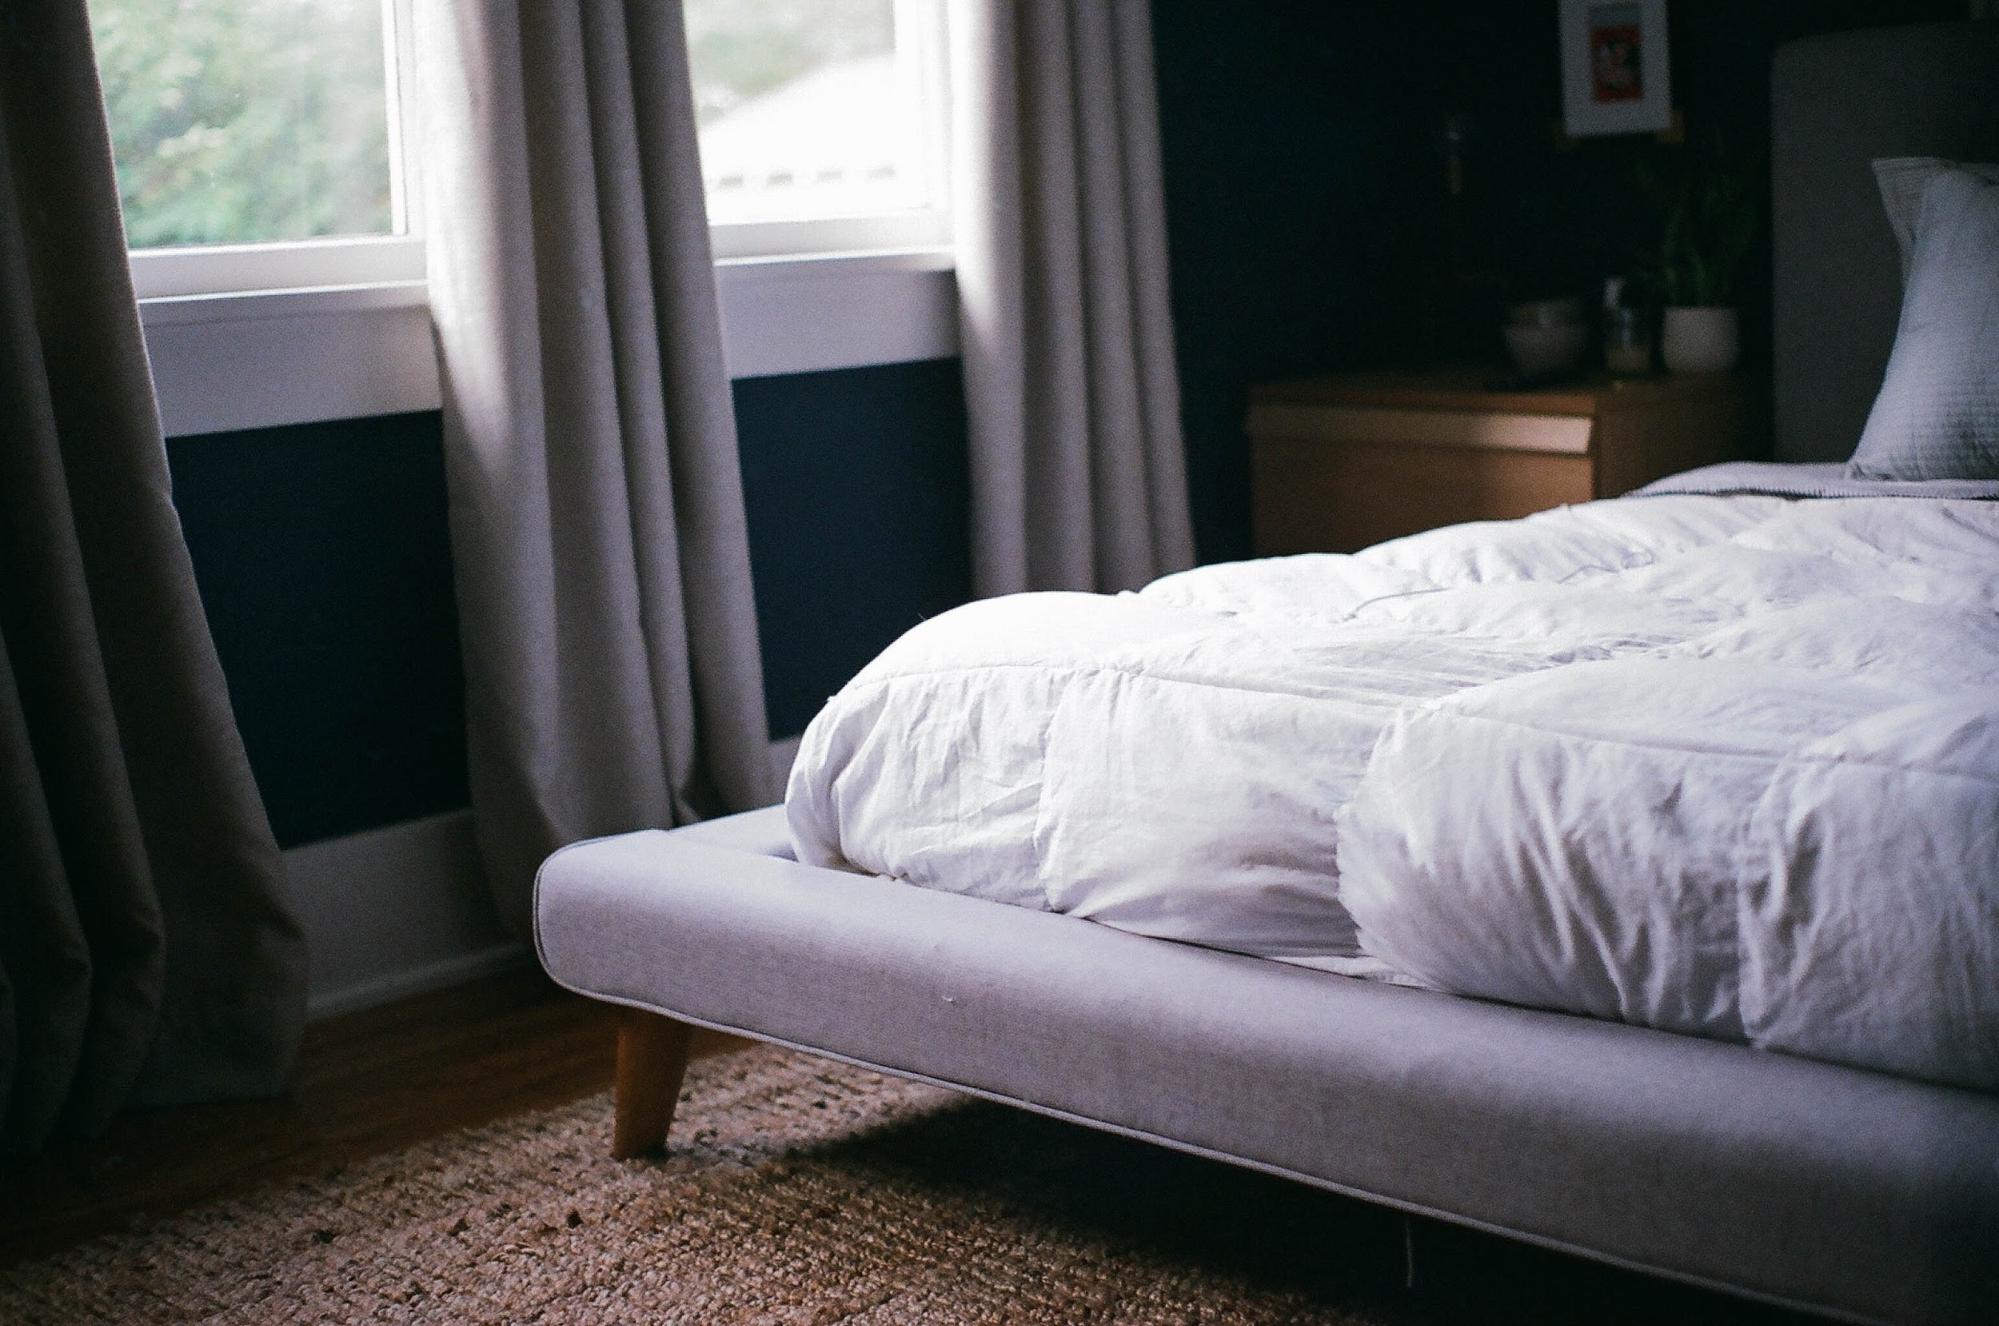 A comfortable white comforter on a bed for a good night sleep next to a window.